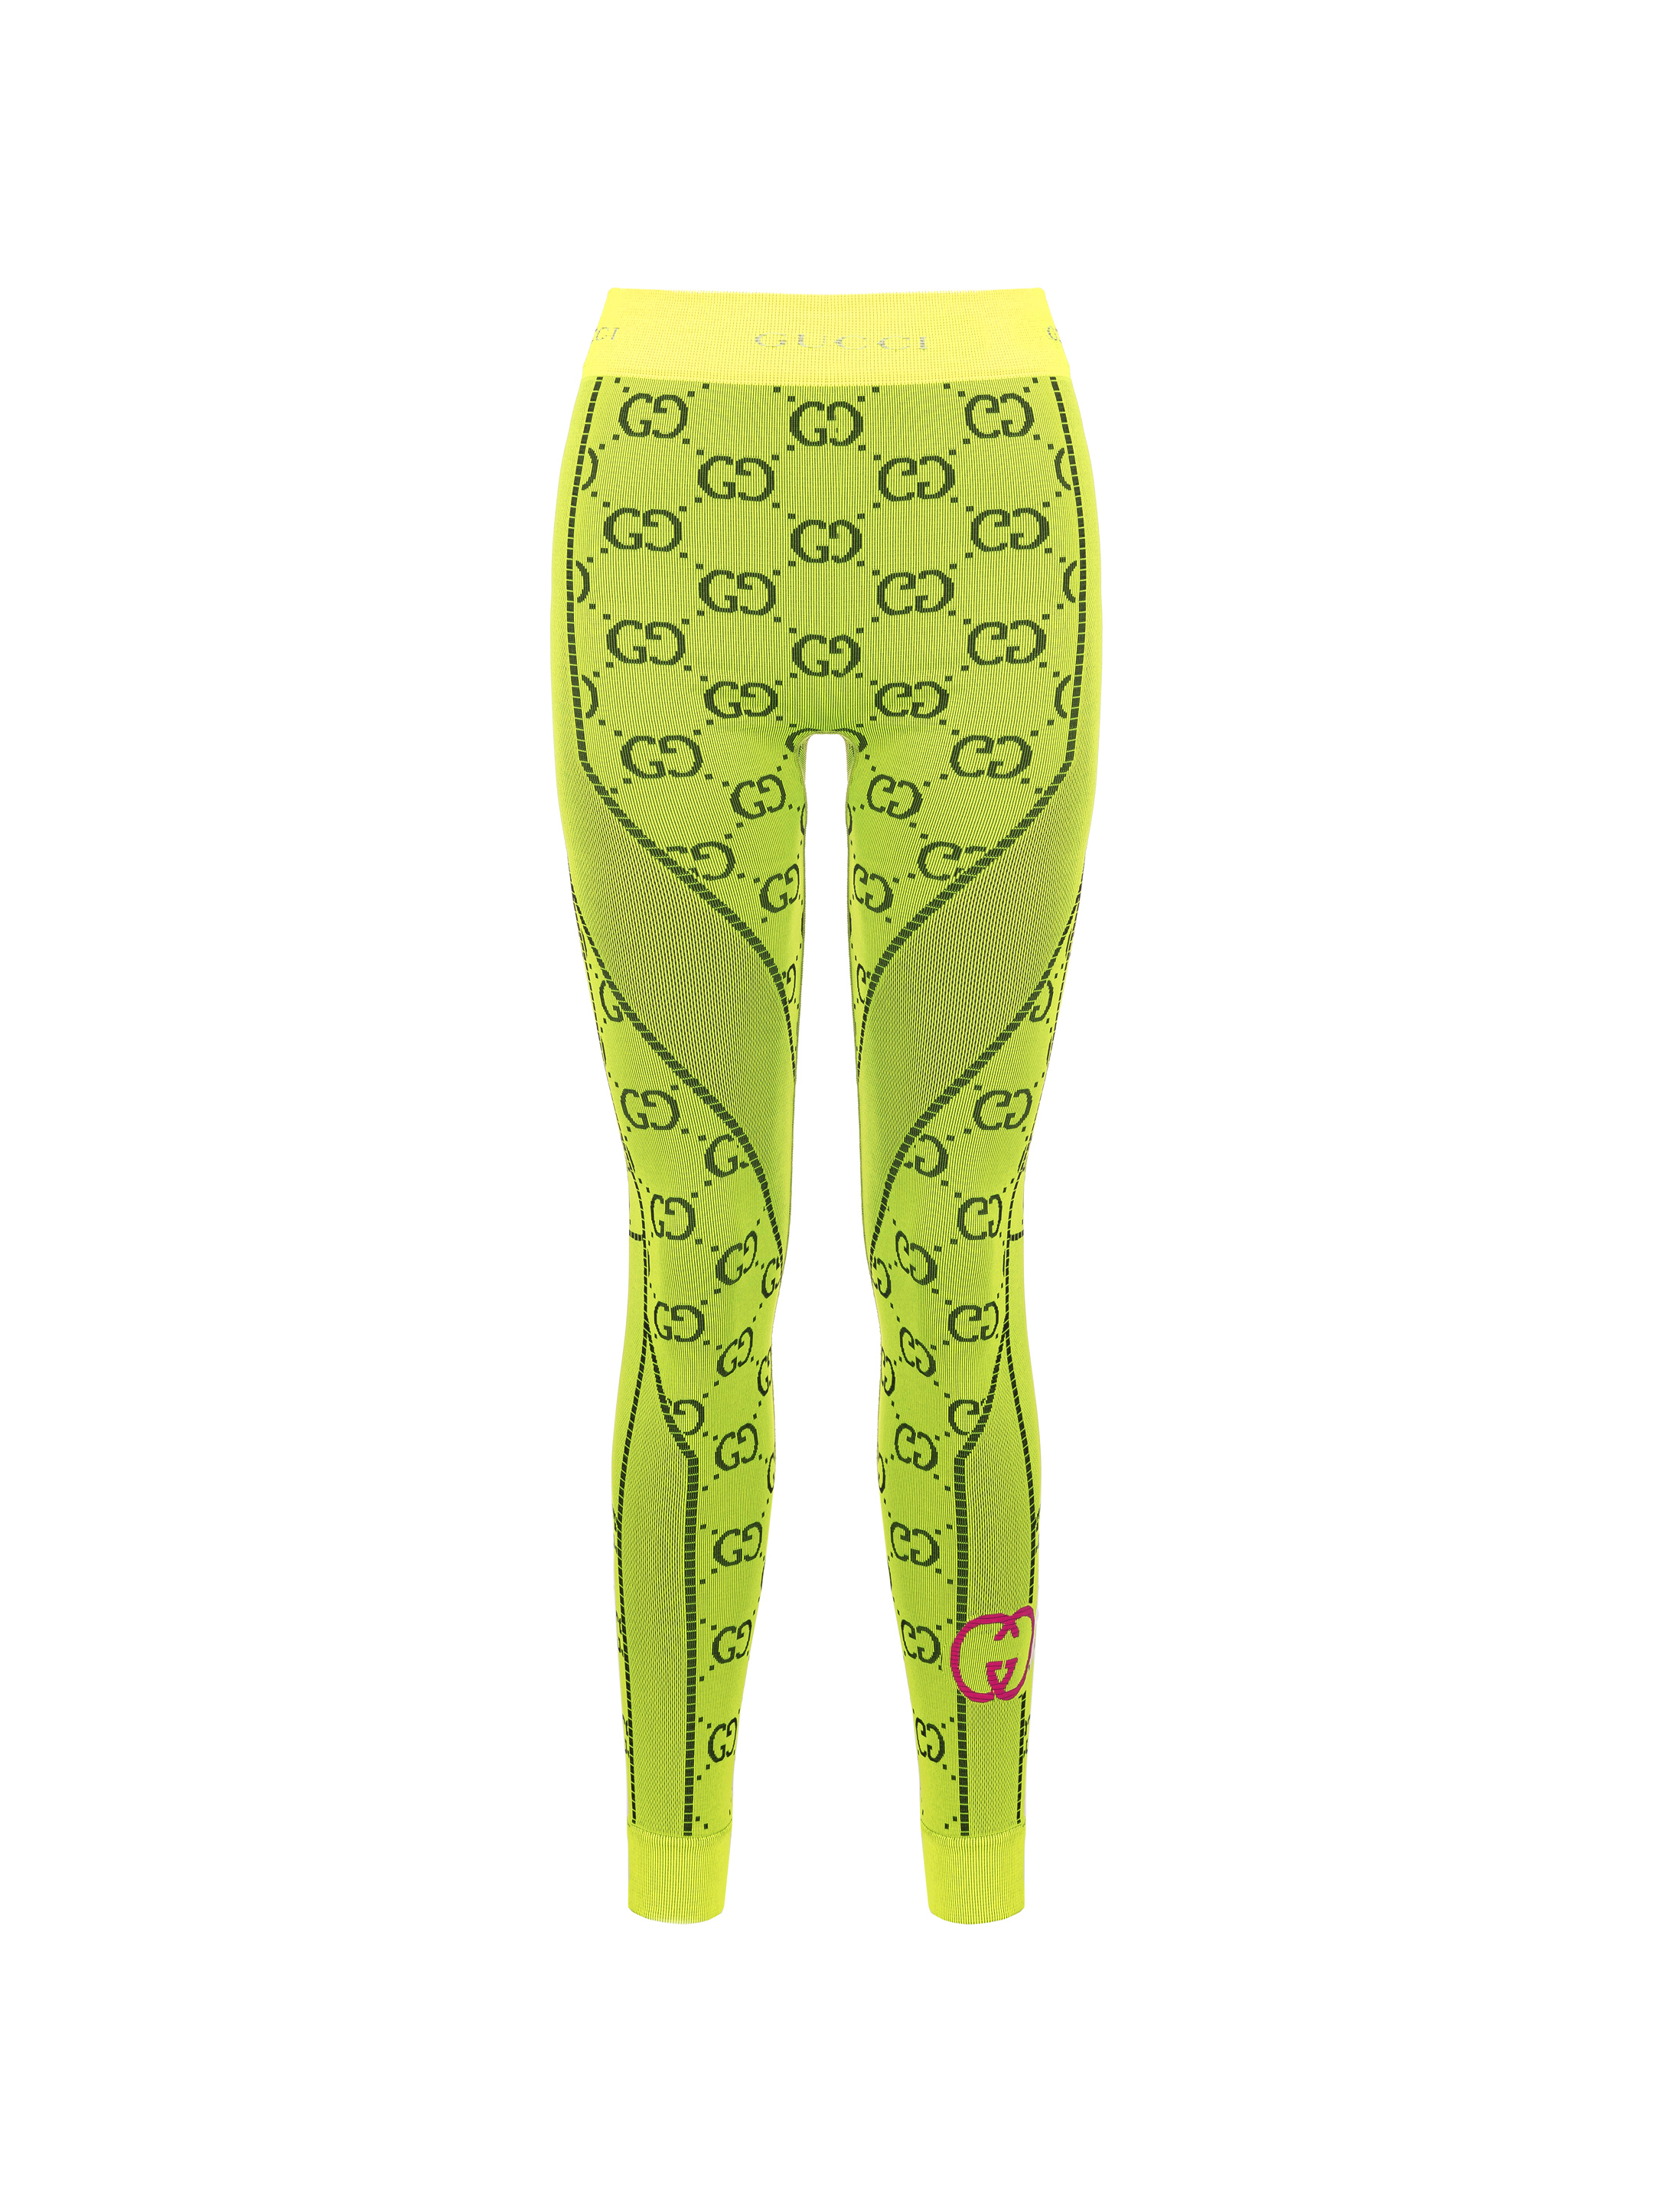 Gucci women's Gucci Love Parade leggings - buy for 382400 KZT in the  official Viled online store, art. 693300 XJEF0.7401_S_222